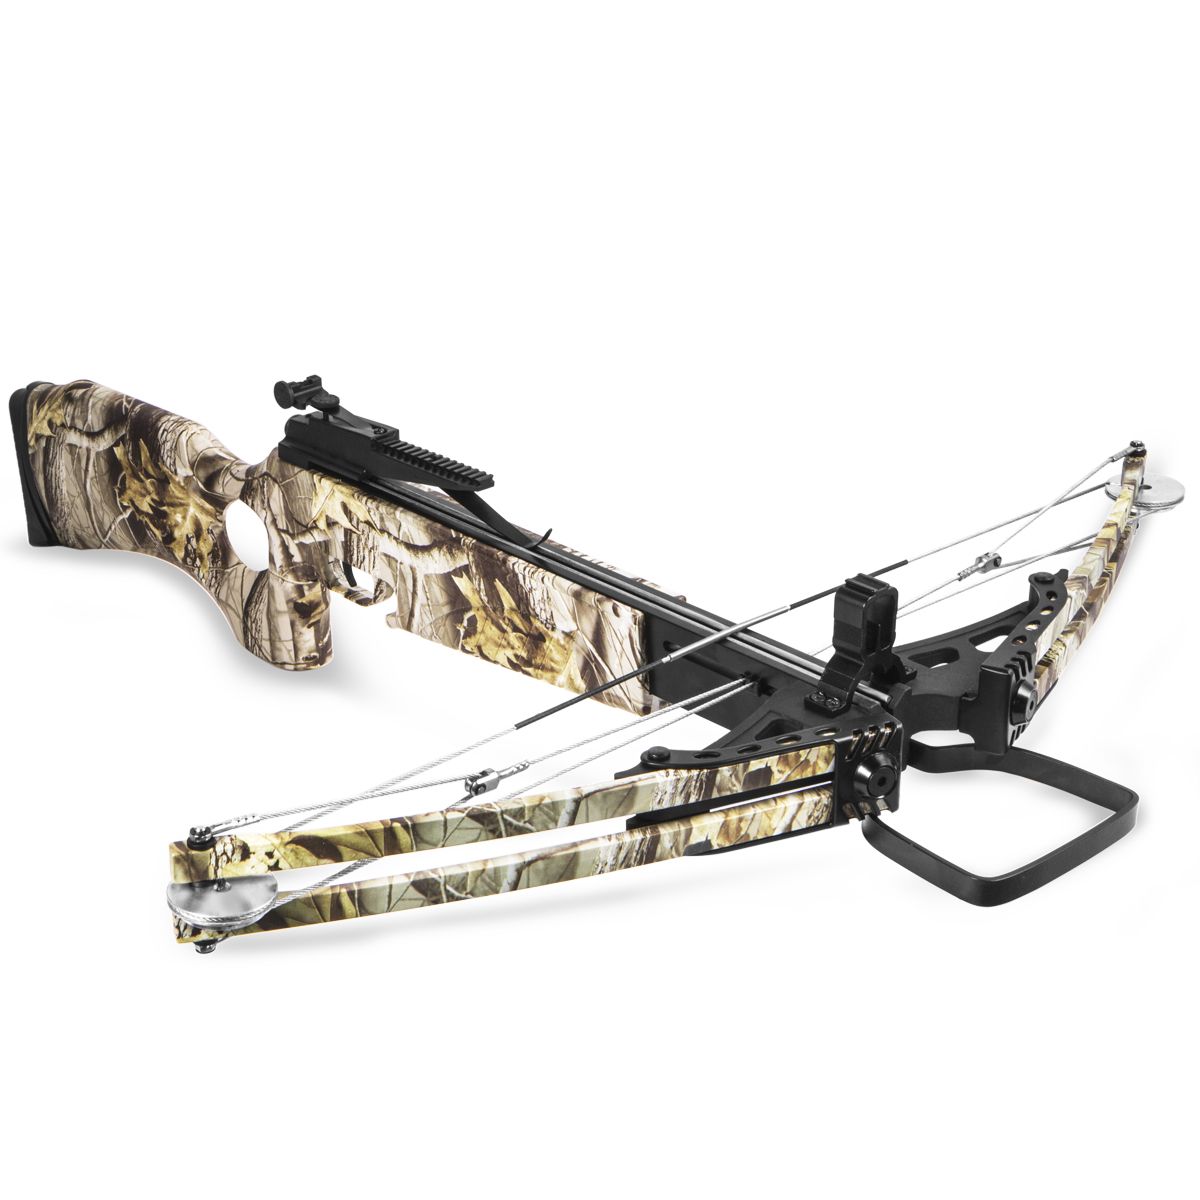 XtremepowerUS Archery Crossbow 180lbs 300 fps Hunting Compound Bow w/ Carrying Bag, Camouflage